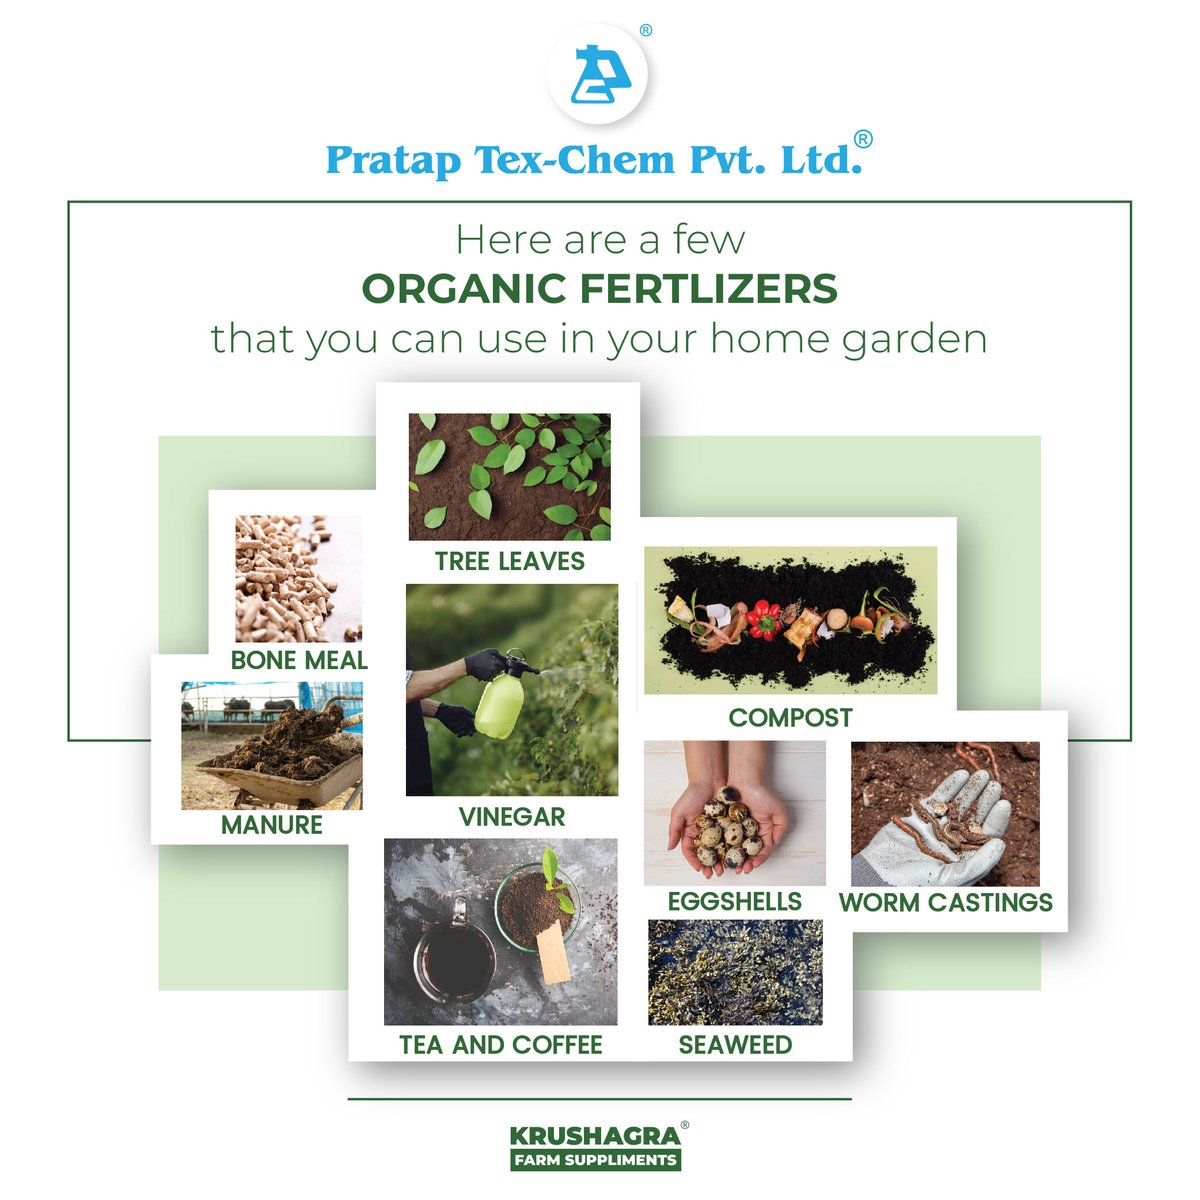 Organic fertilisers are a great way to nourish your small nursery and get great natural products with your investment. 
.
.
#PTCPL #krushagra #organicfertilisers #organic #agriculture #ecofriendly #farm #farmbusiness #biofertilizers #biopesticides #Farmers #fertilizer